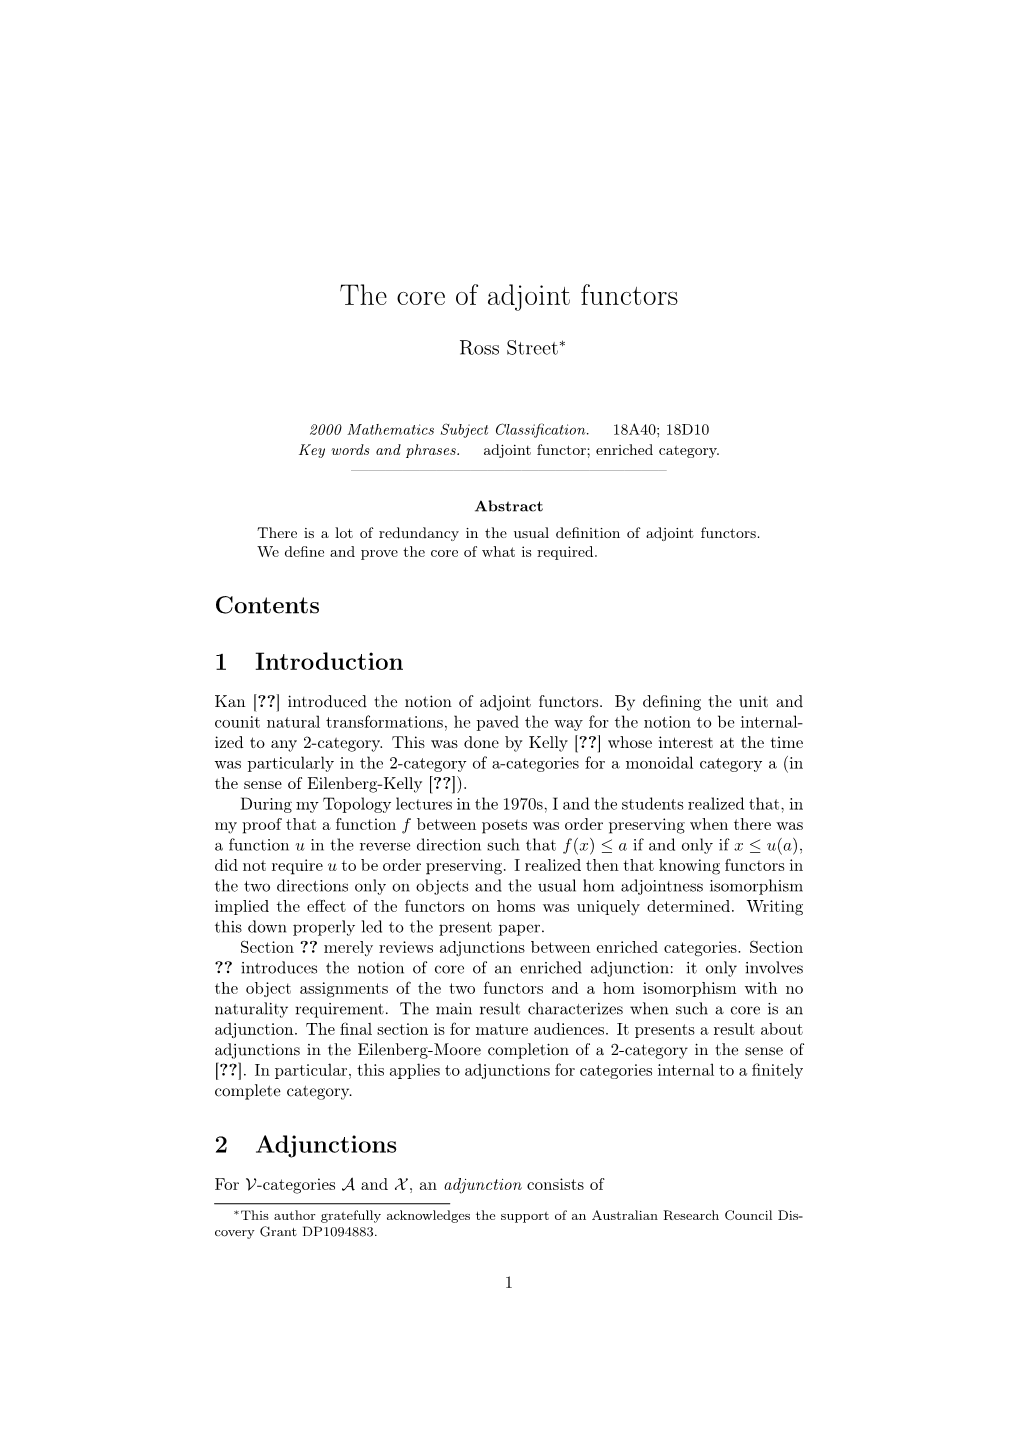 The Core of Adjoint Functors